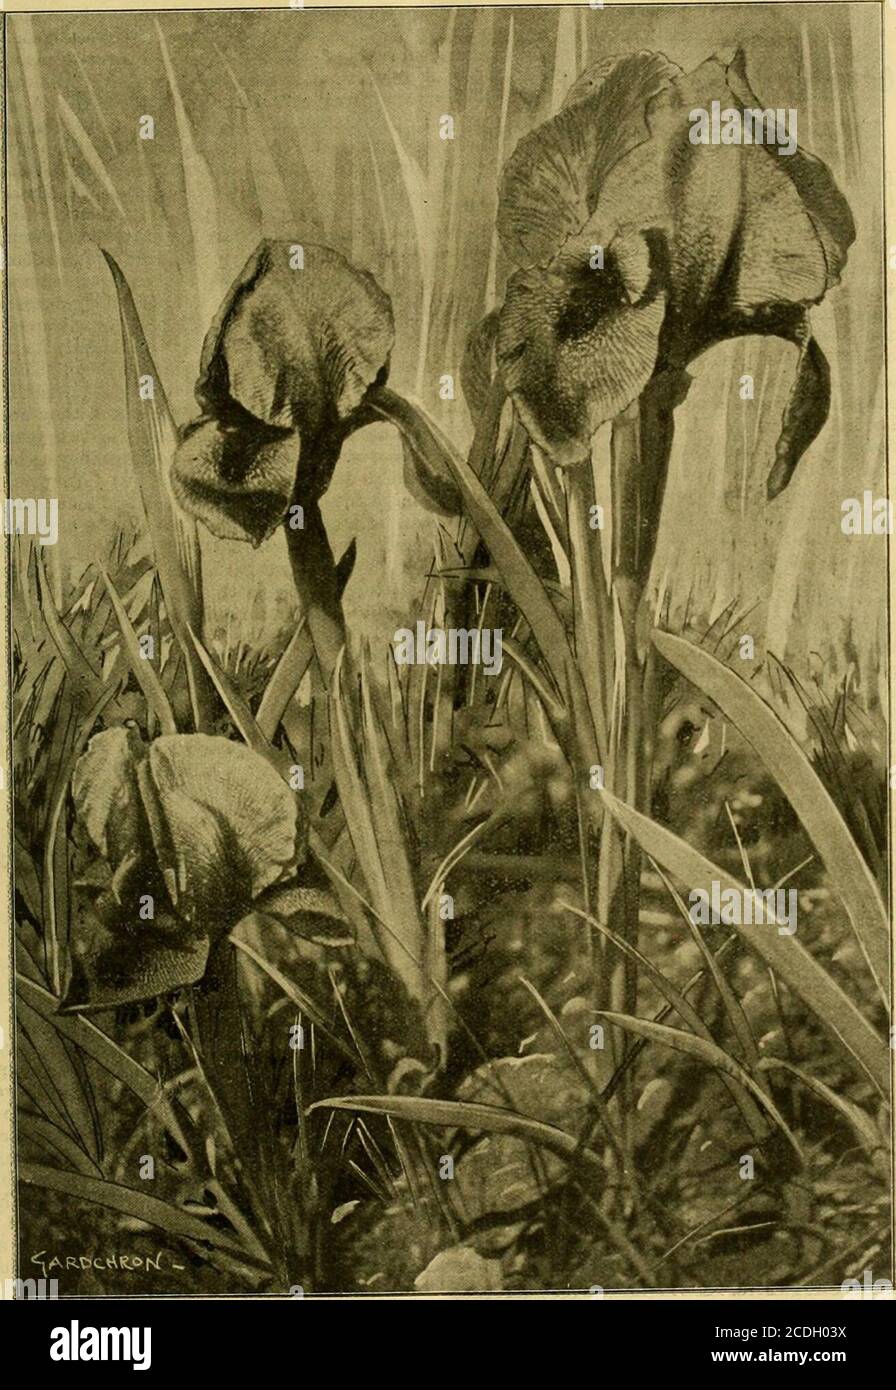 . The Gardeners' chronicle : a weekly illustrated journal of horticulture and allied subjects . usua ly five ovi-tcleaflets, varying from 2 to 5 inches in length;the inflorescences are produced both on the old.and new growths ; the papilionaceous flowers are-borne on a loose raceme, which is from 9 to 15inches in length, the inflorescence very much,resembling that of a Lonchocarpus. The flowers. September 3, inoi. THE GARDENERS CHRONICLE. 163 are white and sweetly-scented, rather less thanJ-inoh in length. The slender iJedicel and thecalyx are brown-red in colour, making a prettycontrast with Stock Photo